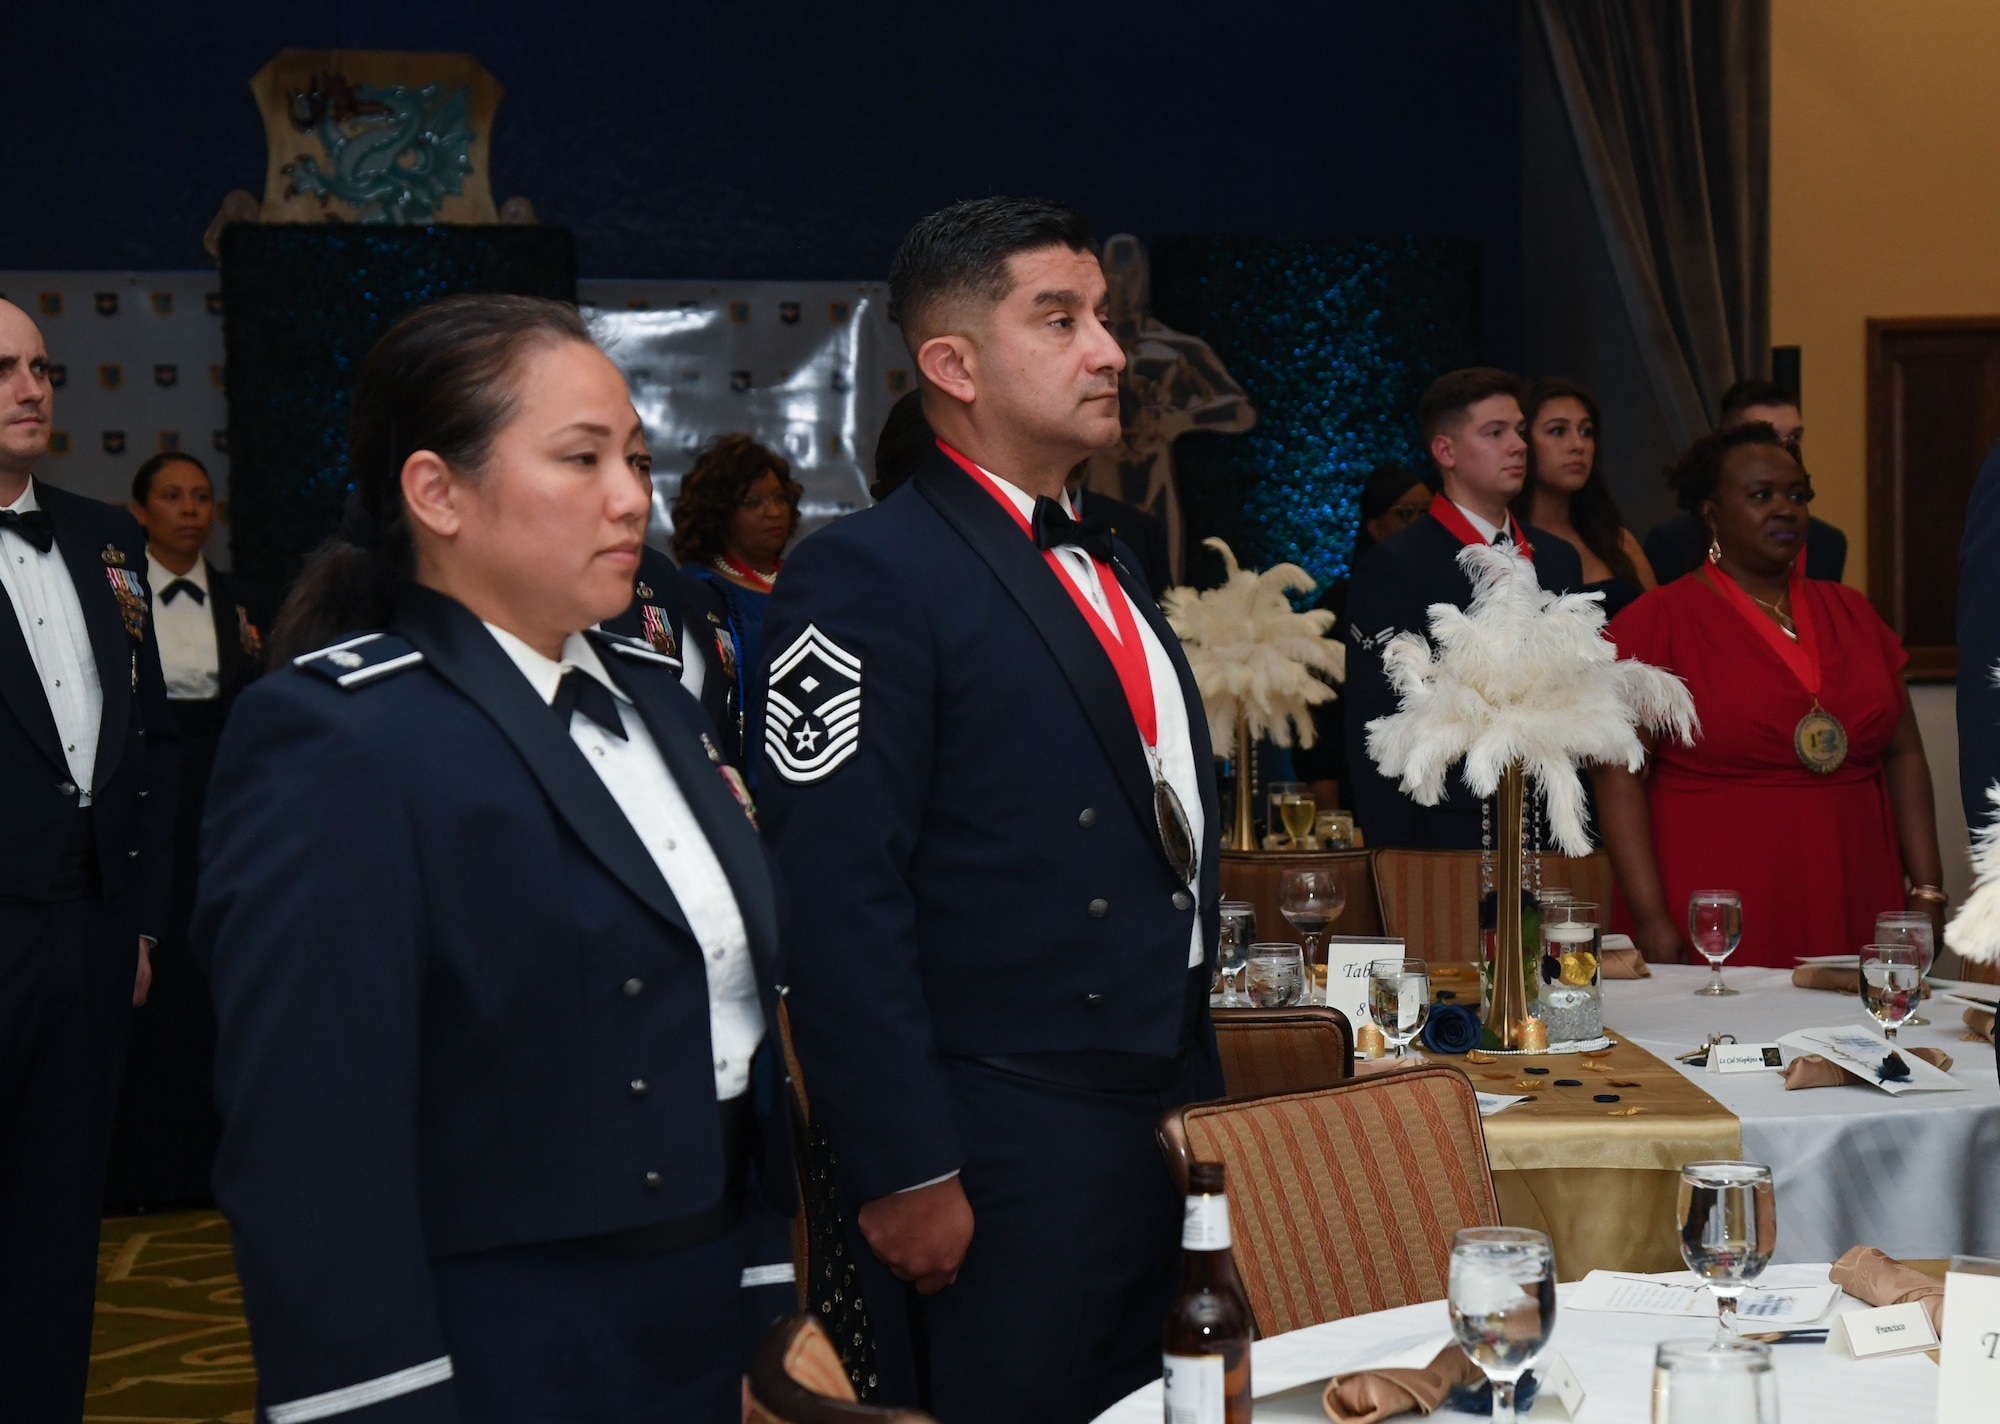 Keesler personnel attend the 81st Training Wing's 2022 Annual Awards Ceremony inside the Bay Breeze Event Center at Keesler Air Force Base, Mississippi, Feb. 24, 2023.